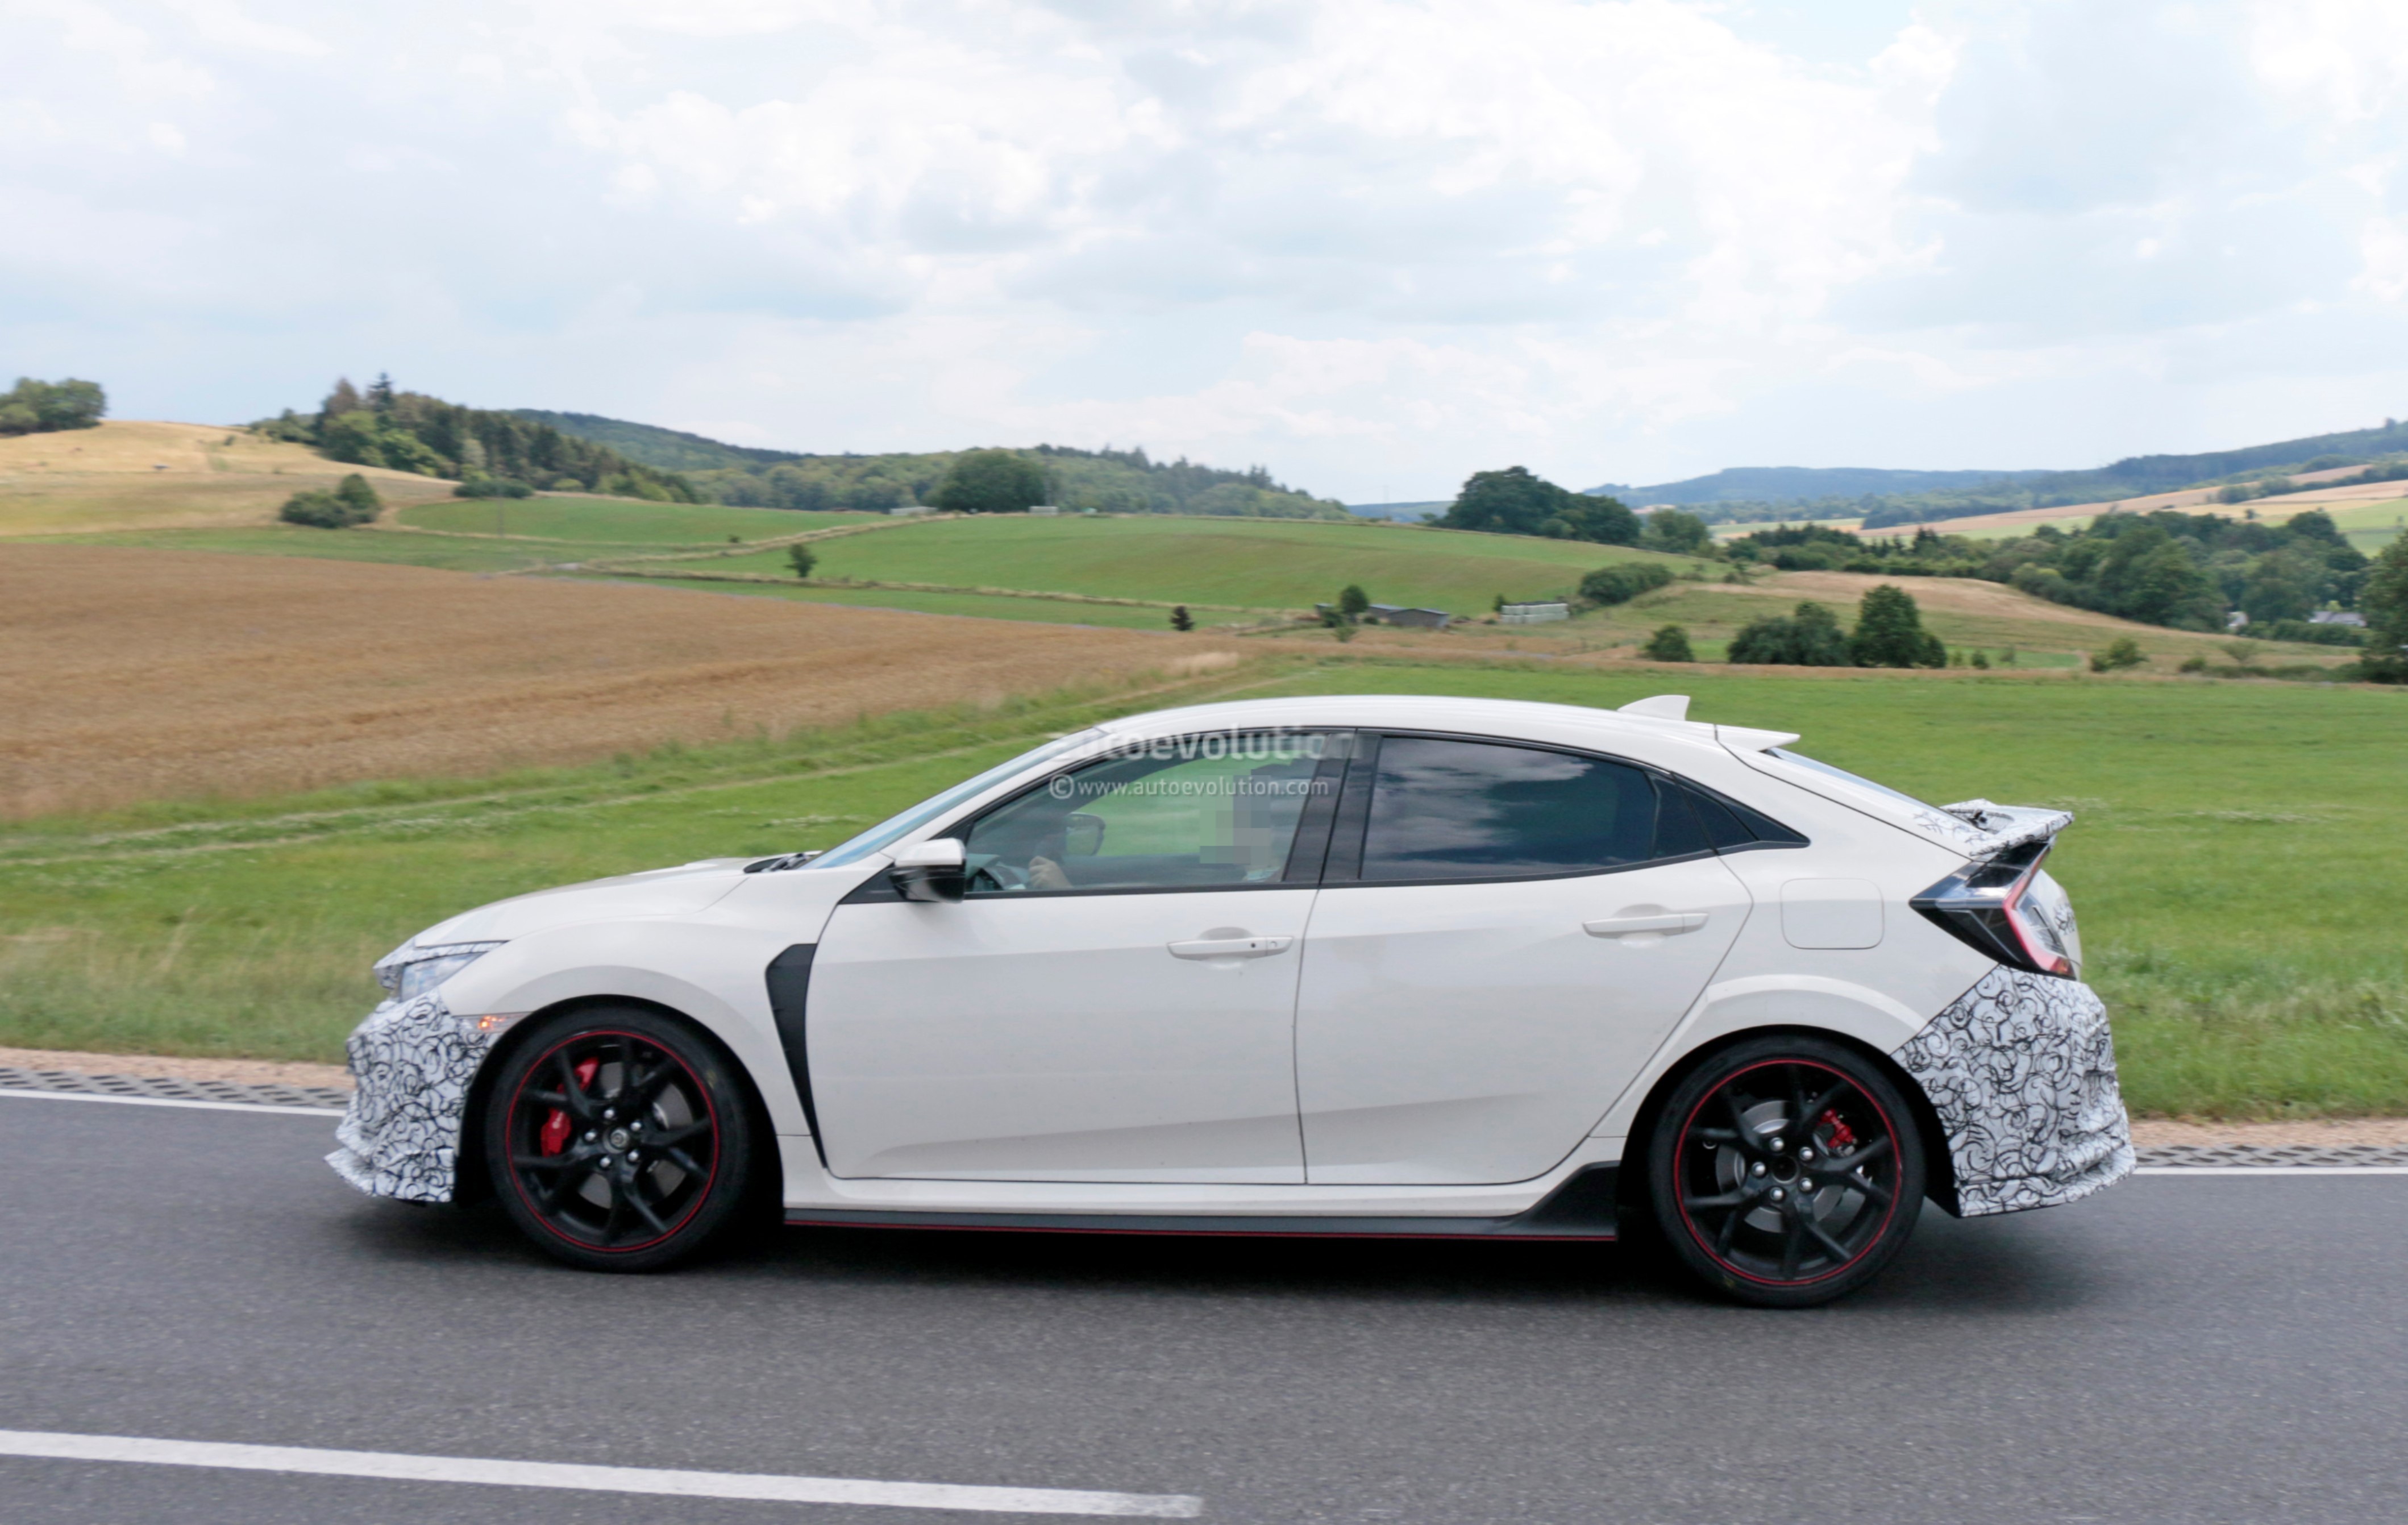 2019 Honda Civic Type R Spied in Red, Differs From White-painted Prototype - autoevolution